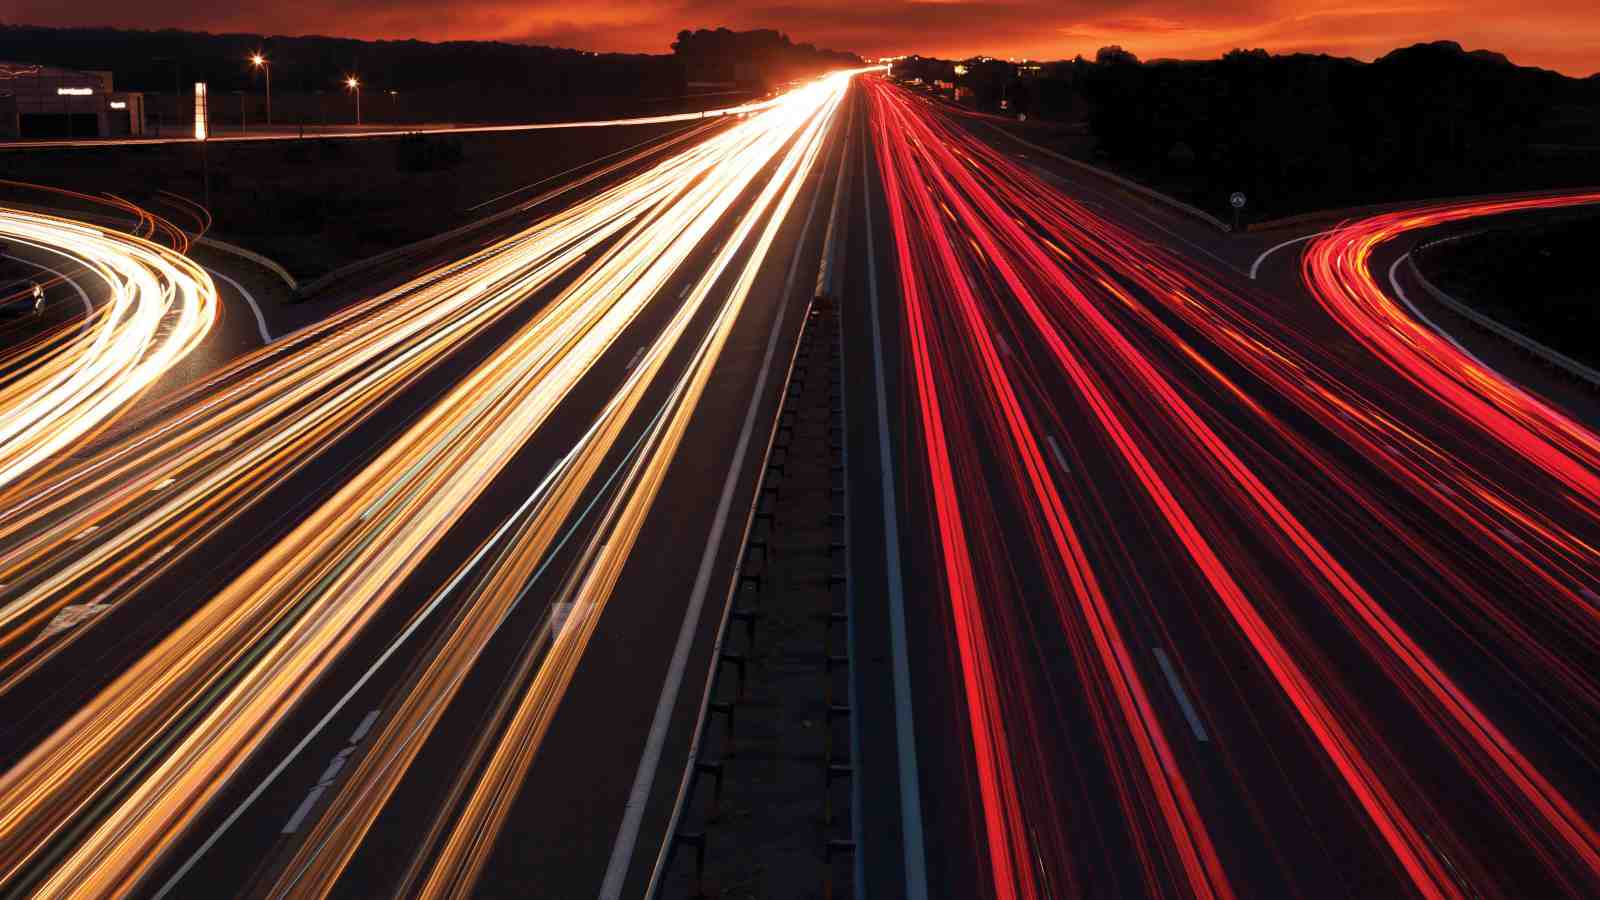 A time lapse image of lights on a highway at dusk.